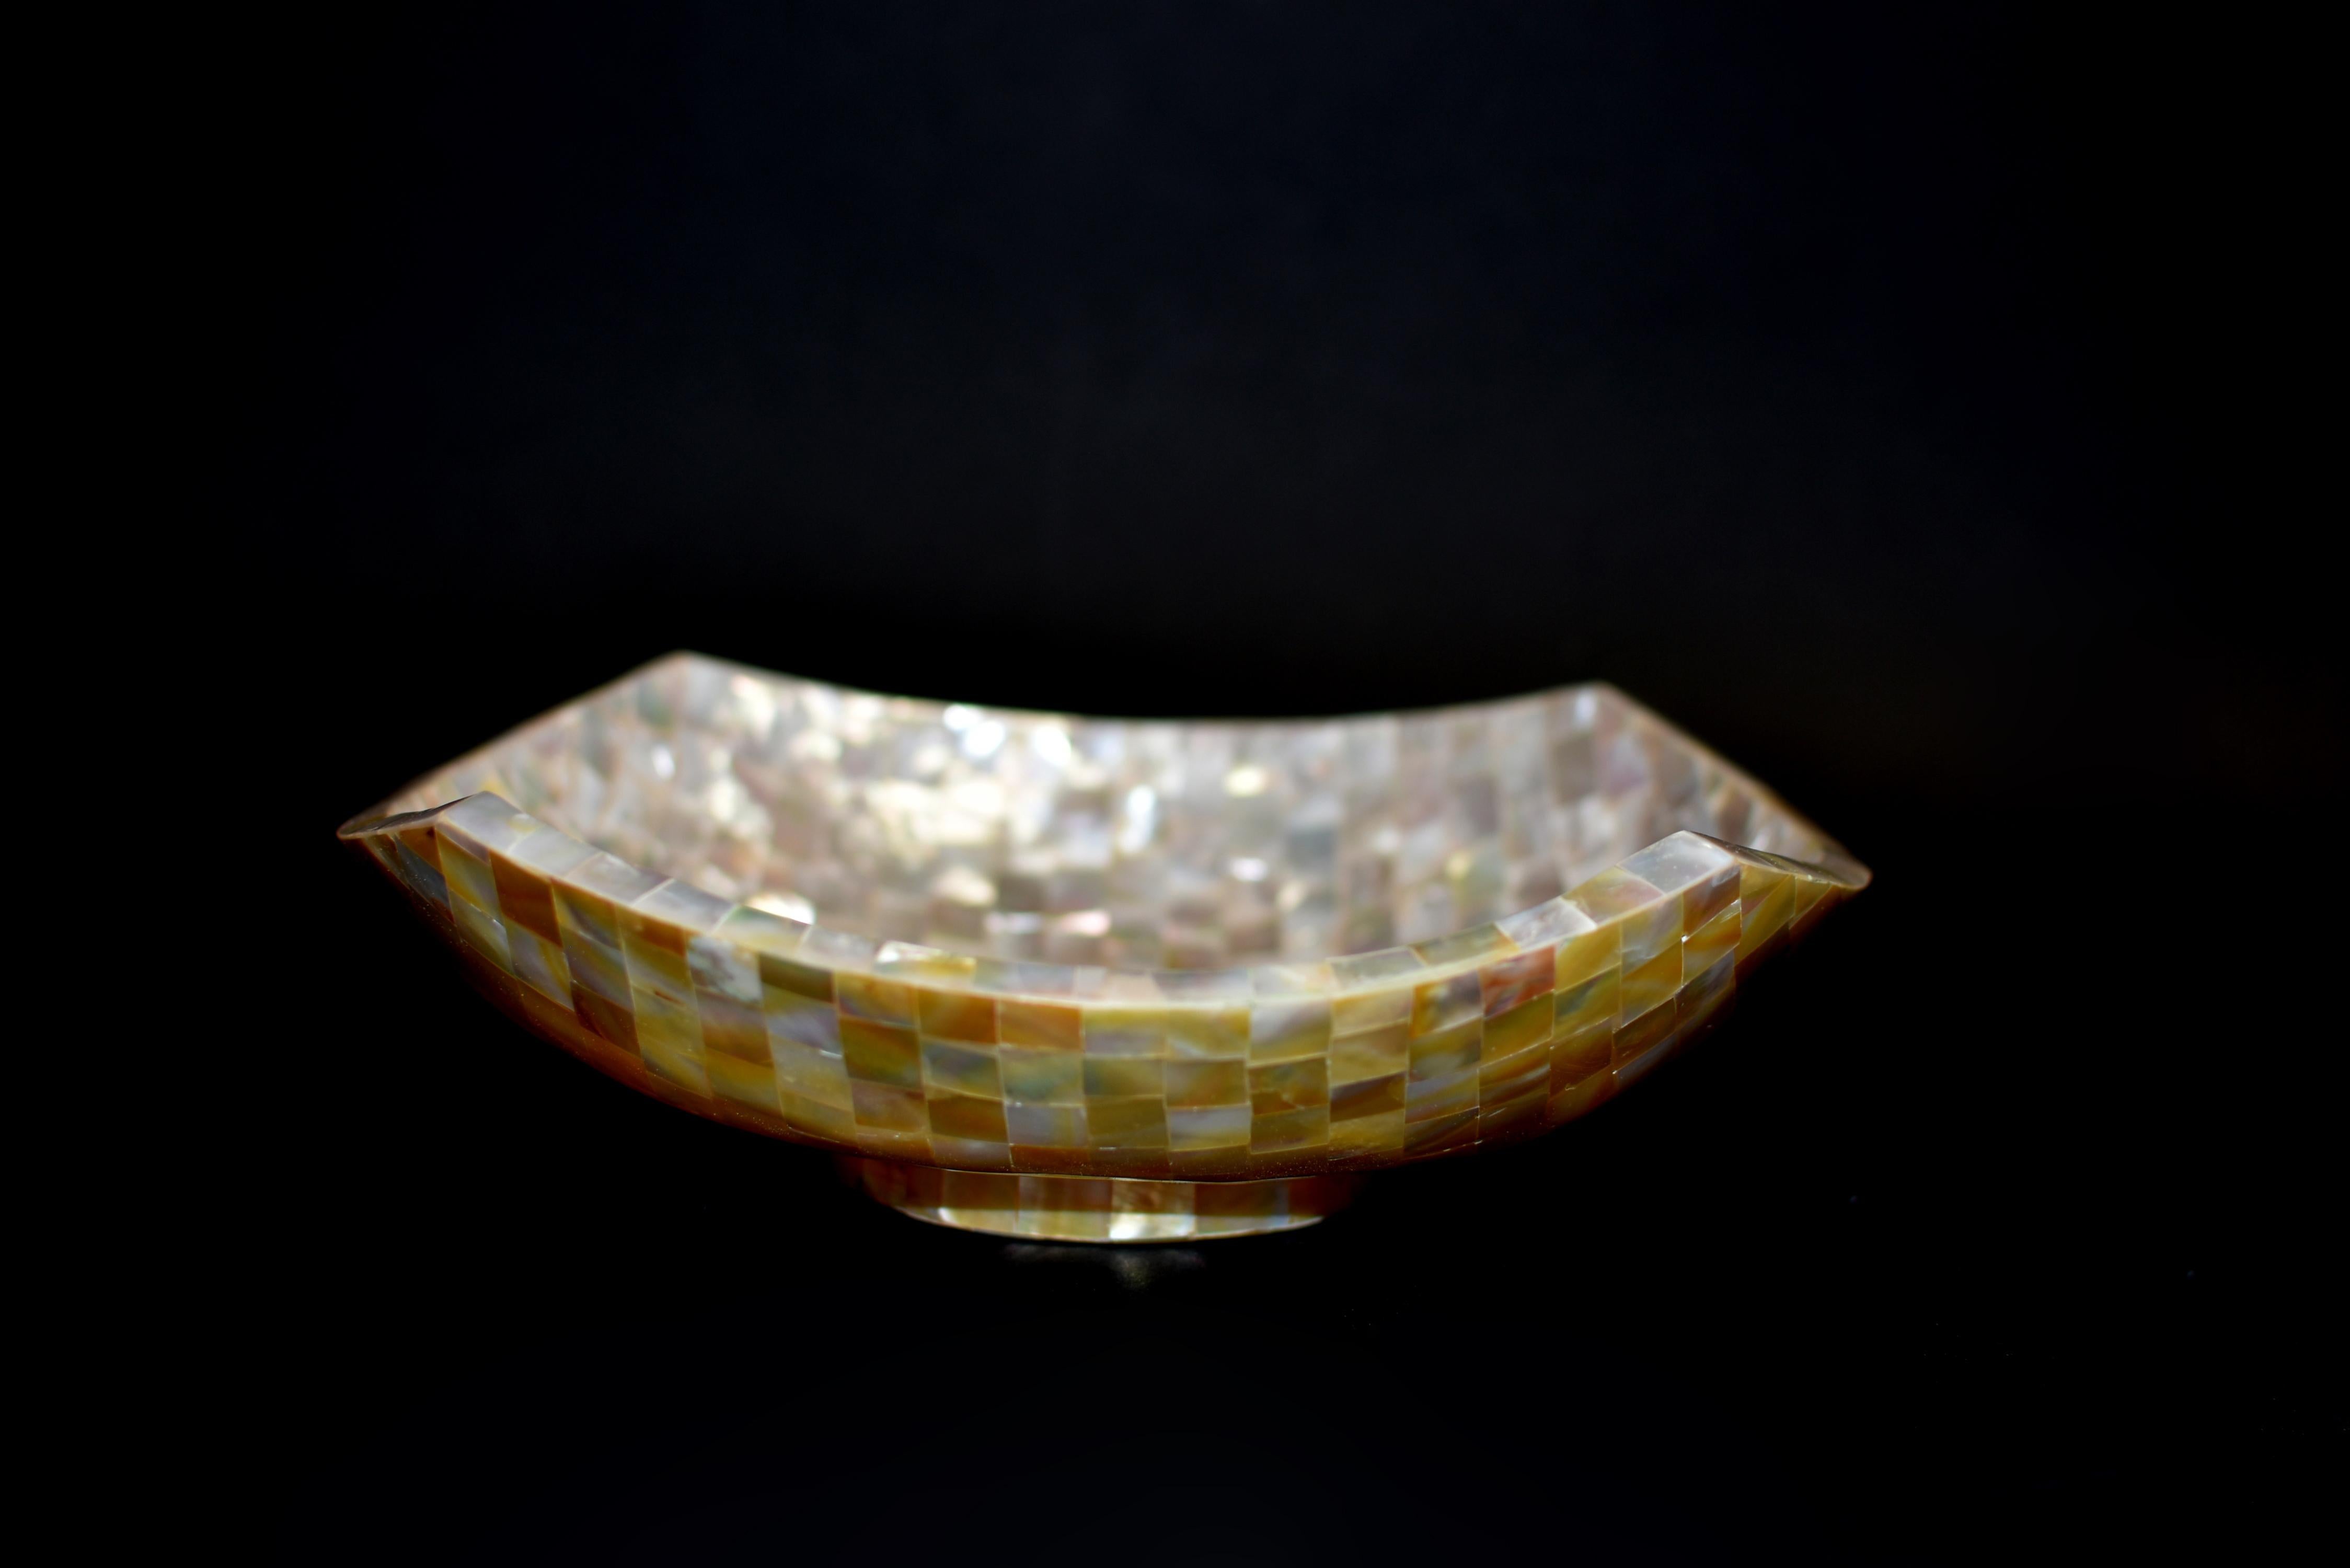 A spectacular mother of pearl bowl, completely hand made by the Indonesian craftsmen. Bowl is meticulously encrusted with mother of pearl and polished to a beautiful, lustrous shine. Perfectly smooth to touch, iridescent inside, out and all around.